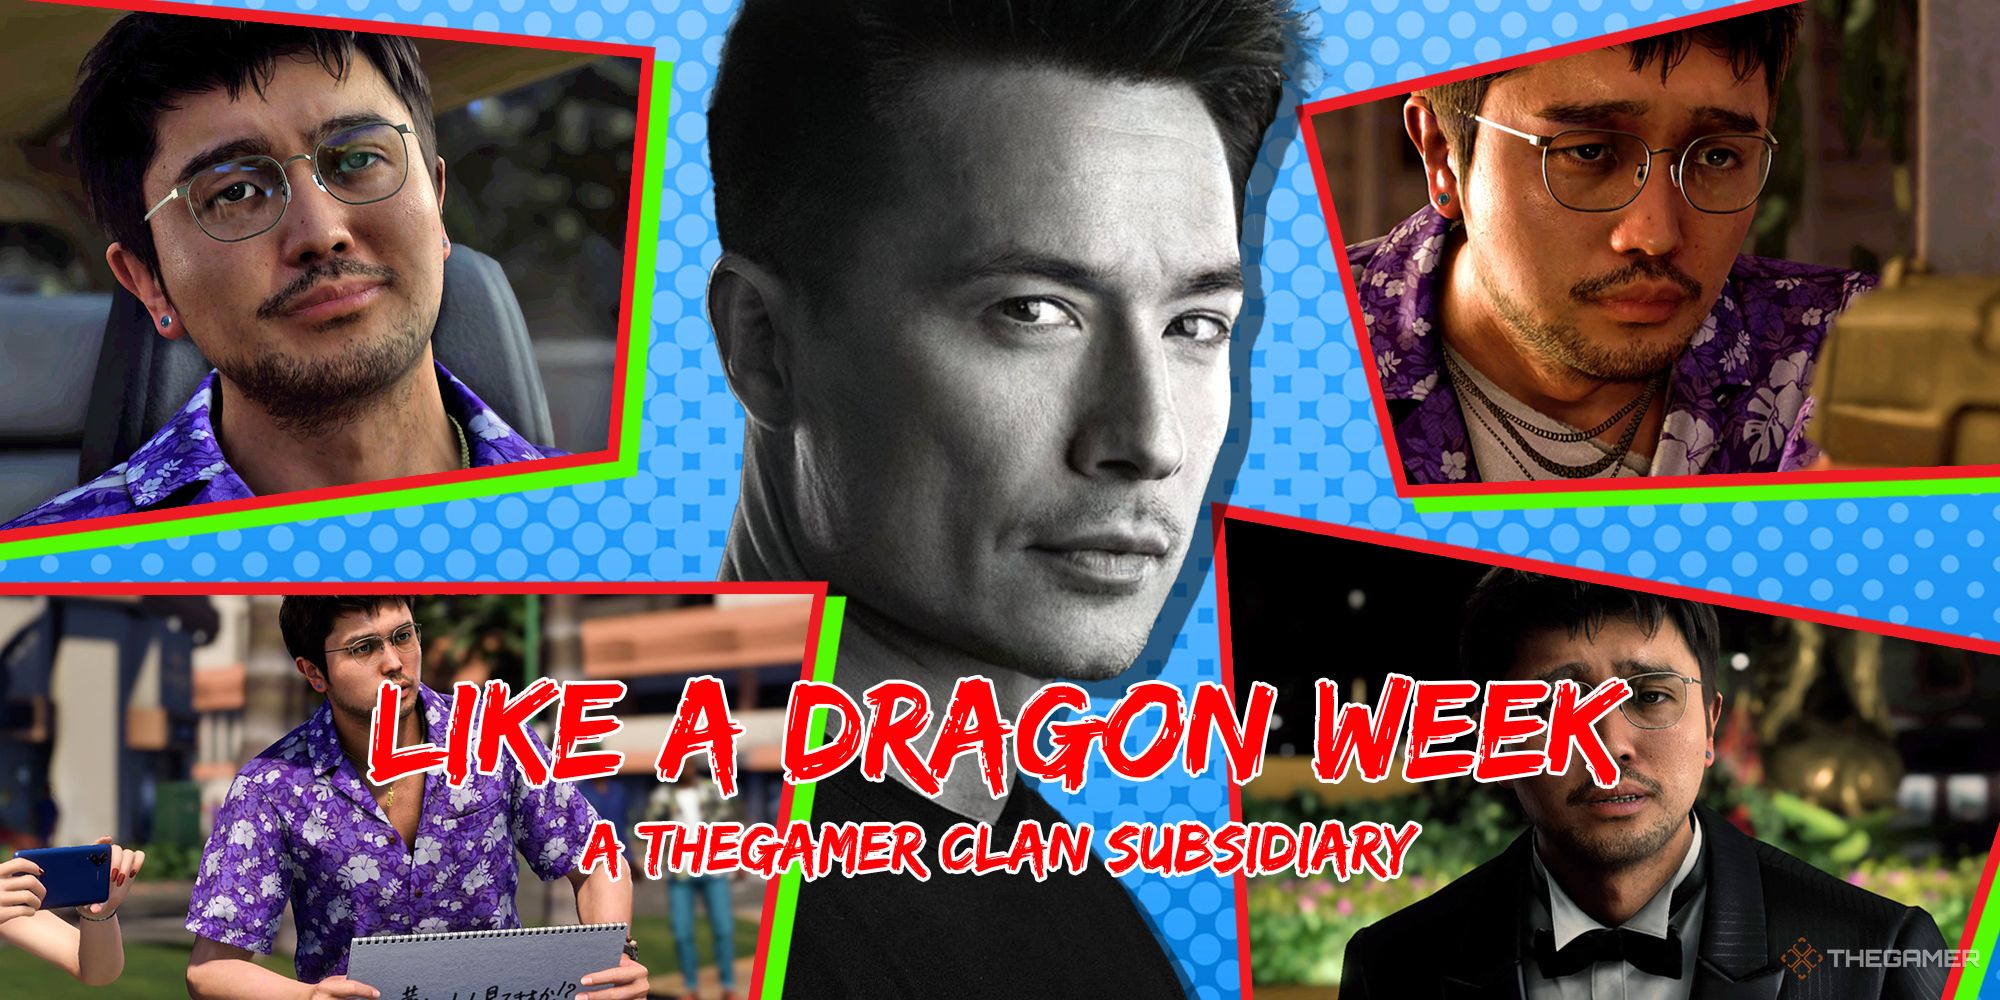 A photo of Matt Yang King with screenshots of Like a Dragon Infinite Wealth's Tomizawa around him in a collage and the Like a Dragon Week text overlaid on top.